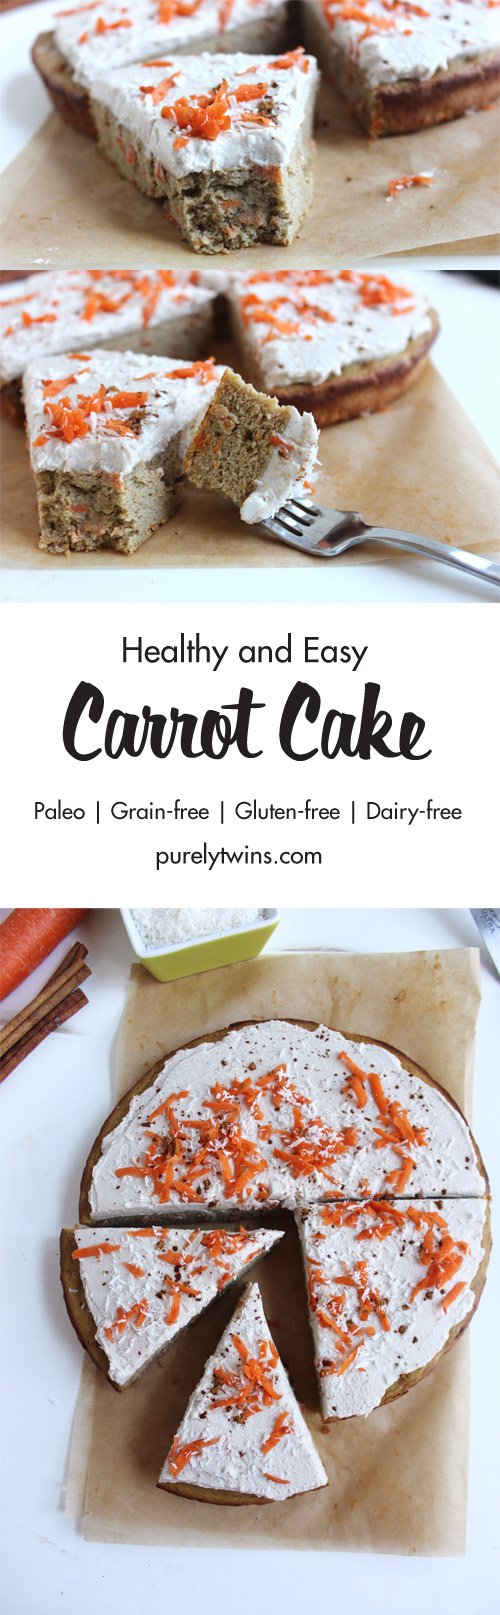 Healthy and easy carrot cake with a dairy free coconut cream frosting. Paleo dessert. If you are looking for a carrot cake recipe that is gluten-free and grain-free this is your recipe. A must make recipe if you love carrot cake and simple recipes. This carrot cake is made using a blender.